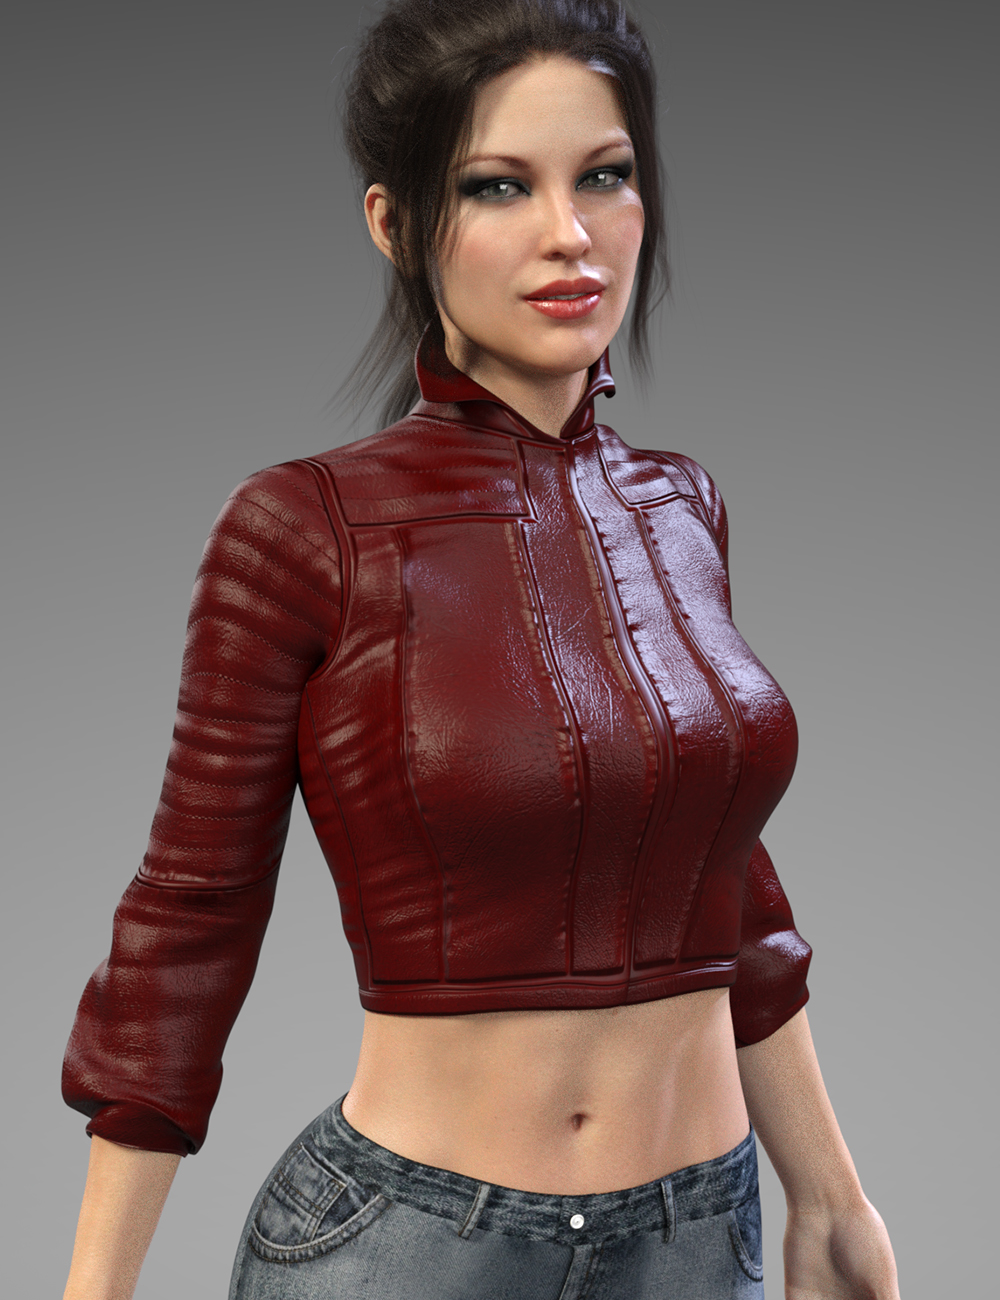 X-Fashion 4 in 1 Leather Jacket for Genesis 8 Female(s) by: xtrart-3d, 3D Models by Daz 3D